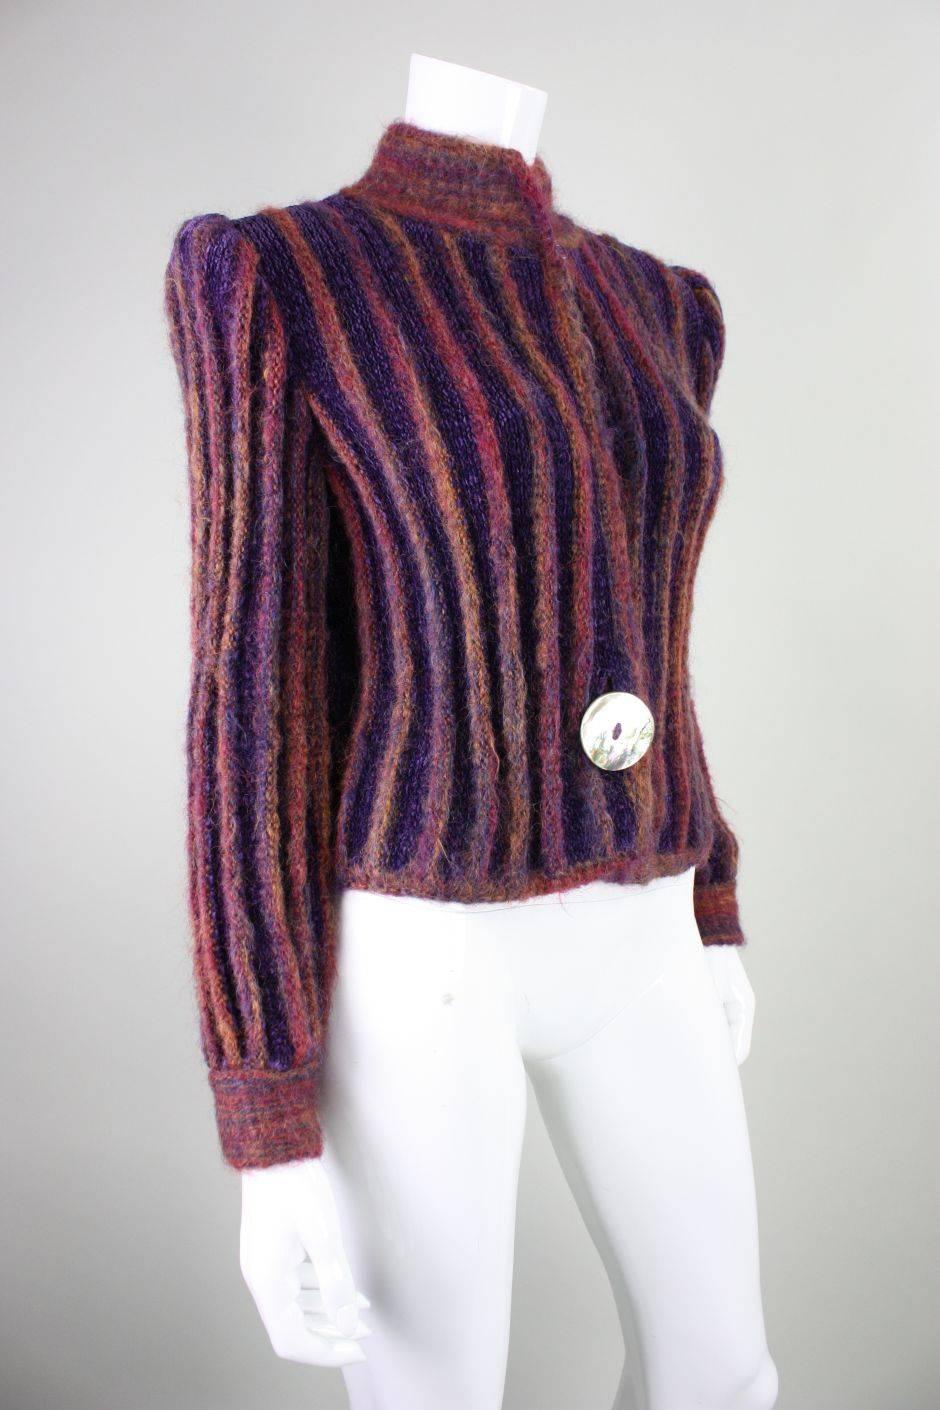 Vintage cardigan from Ann Caron by Annette Pyes dates to the 1980's.  It is made of a striped mixture of yarns of different hues of pink and purple.  Mock neck.  Large shell button at center front waist  and smaller button at neck.  Padded